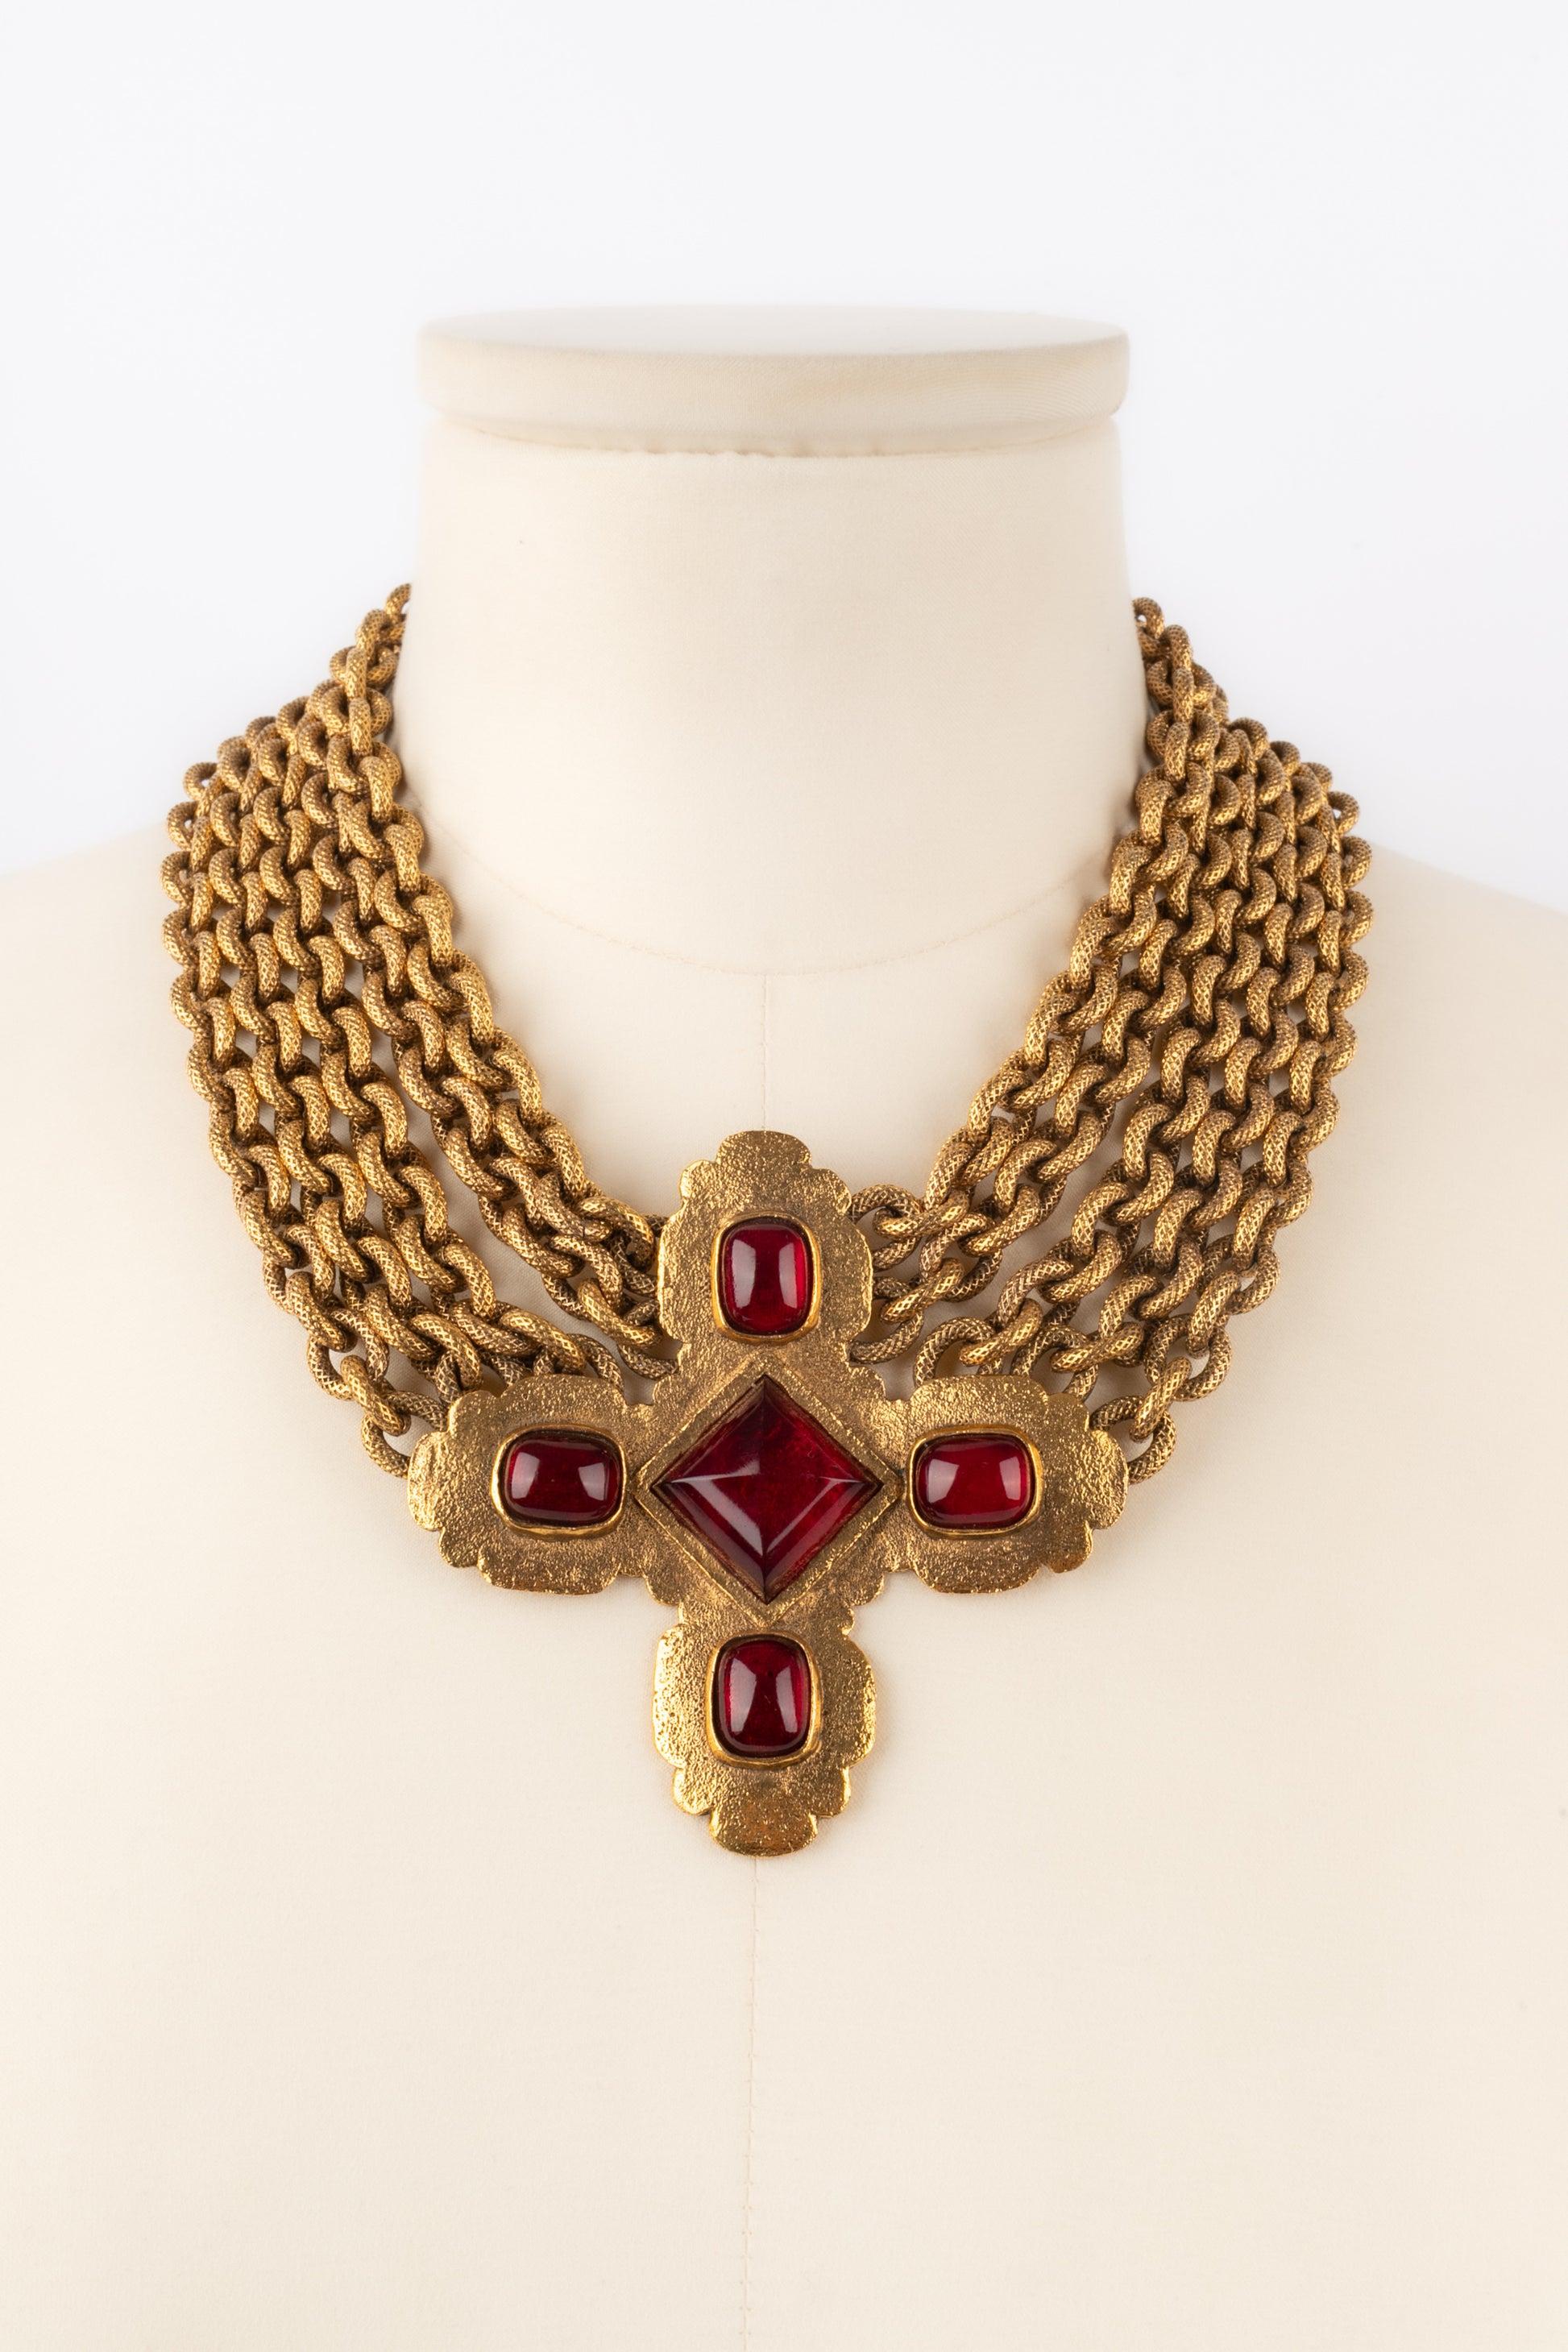 Women's Chanel Cross Golden Metal Short Necklace with Red Glass Paste, 1990s For Sale